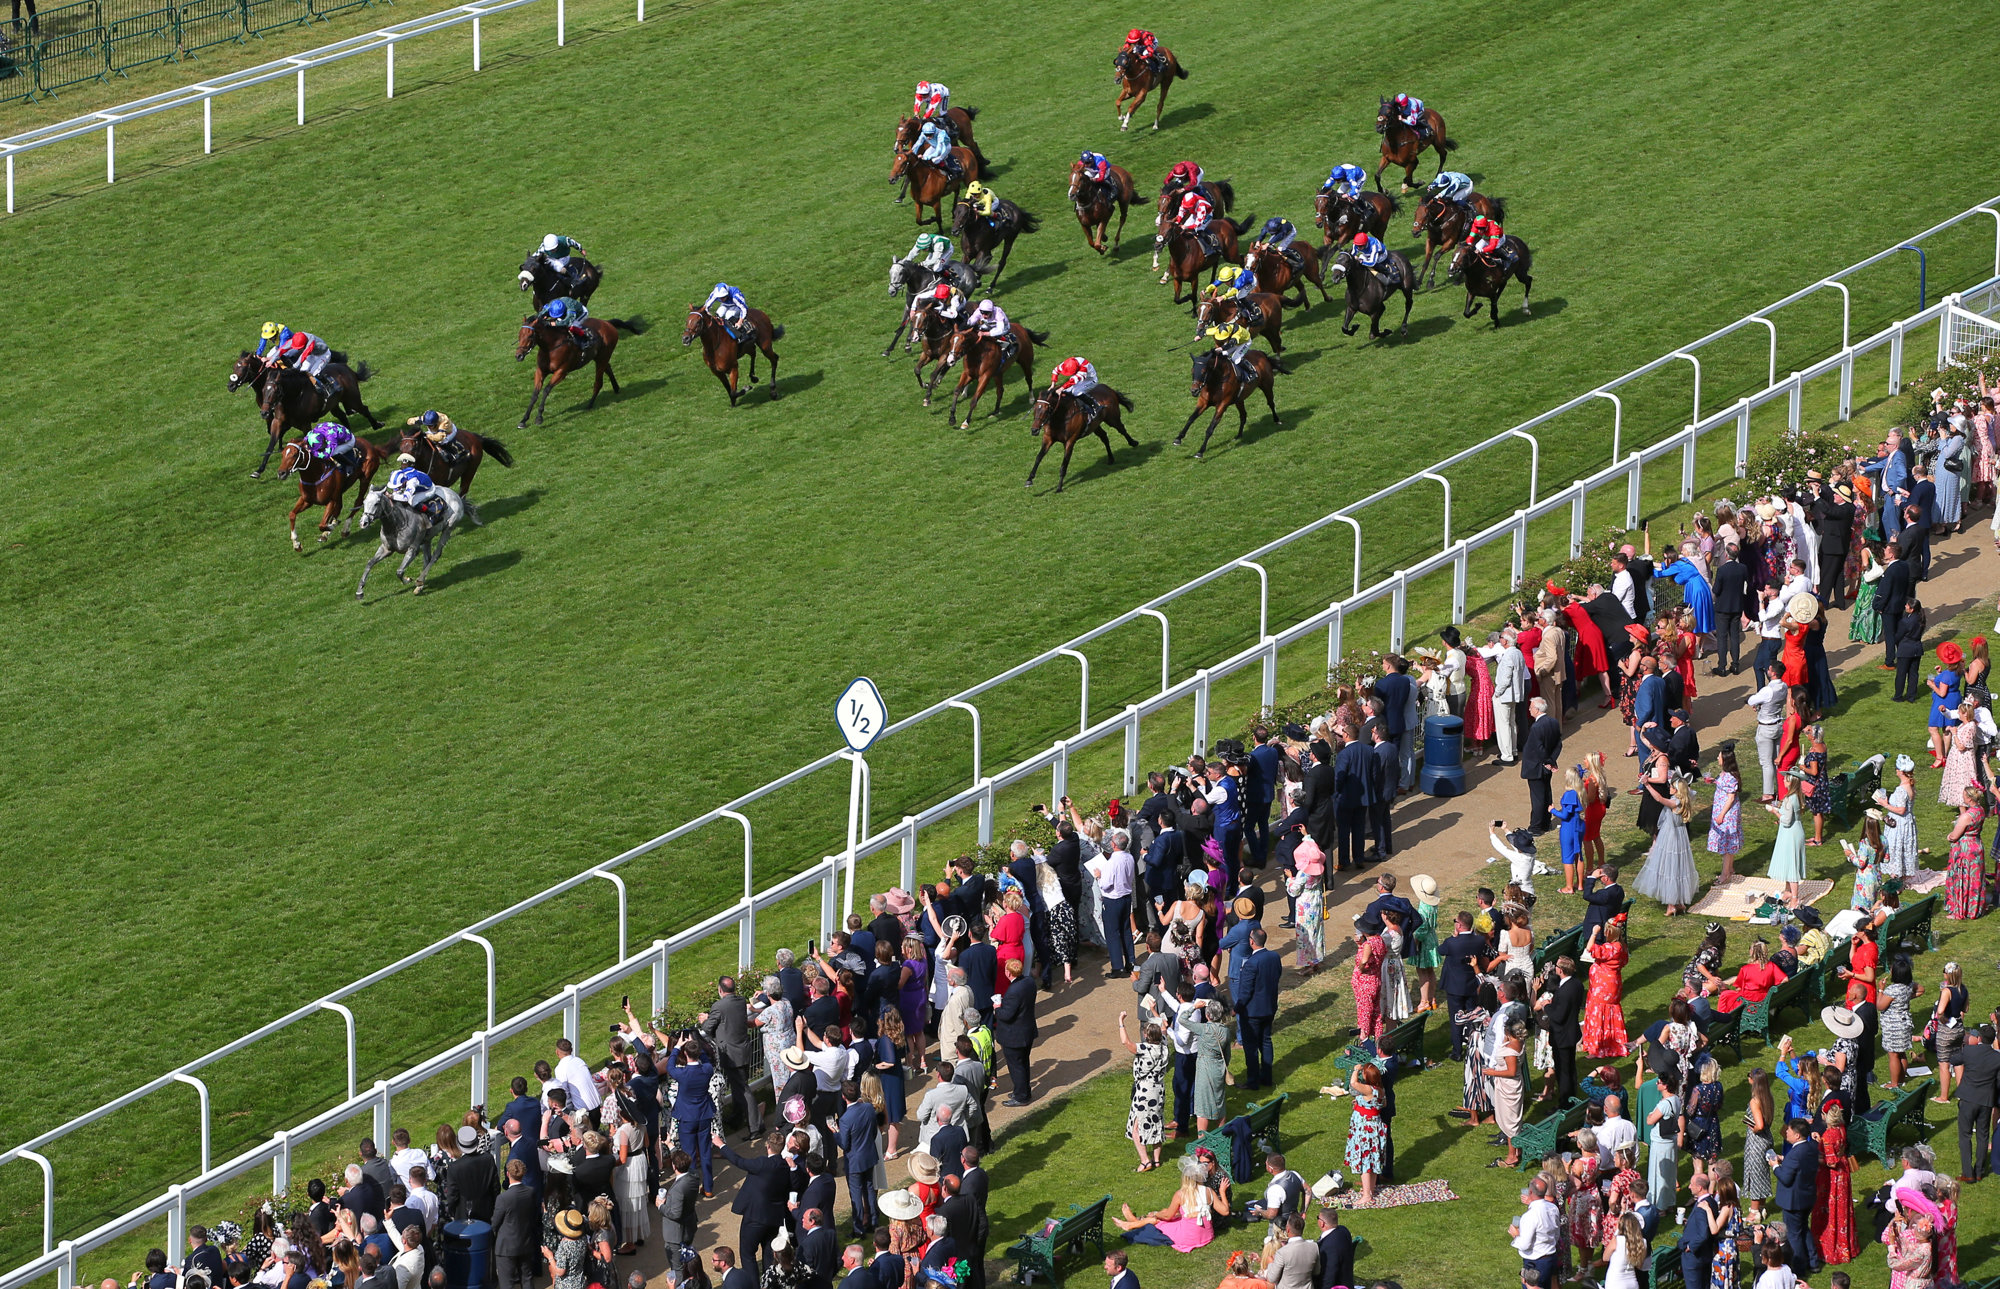 A Horse-By-Horse Guide For The Gold Cup At Royal Ascot